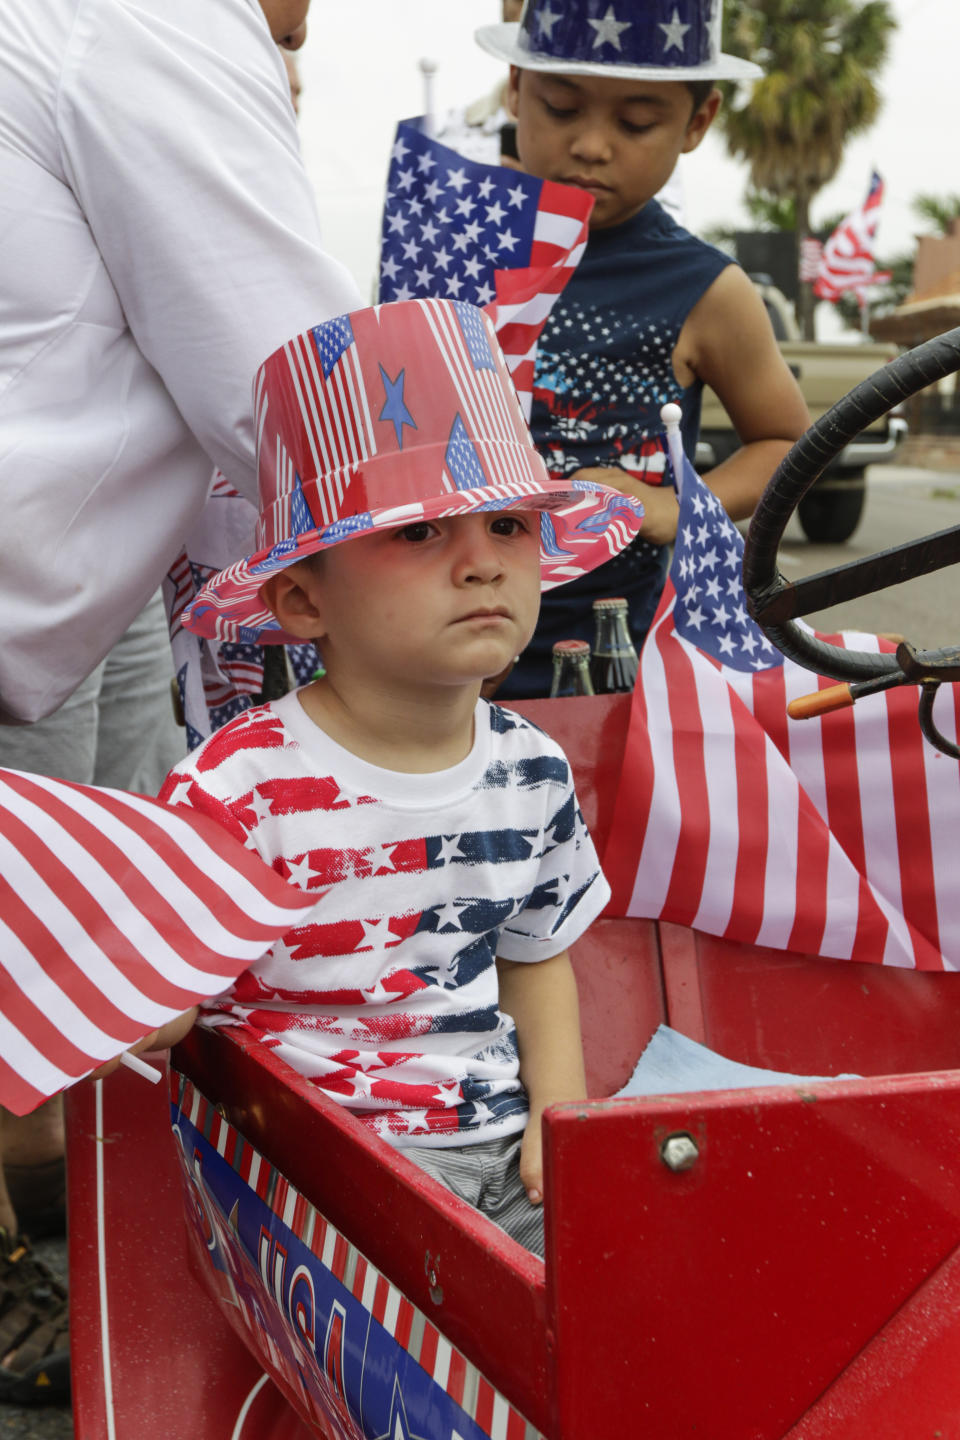 Caleb Reyna waits in a minature motorcar for the parade to start Thursday, July 4, 2019, at the Brownsville Herald's 19th annual Salute to Freedom Fourth of July parade in Brownsville, Texas. (Denise Cathey/The Brownsville Herald via AP)